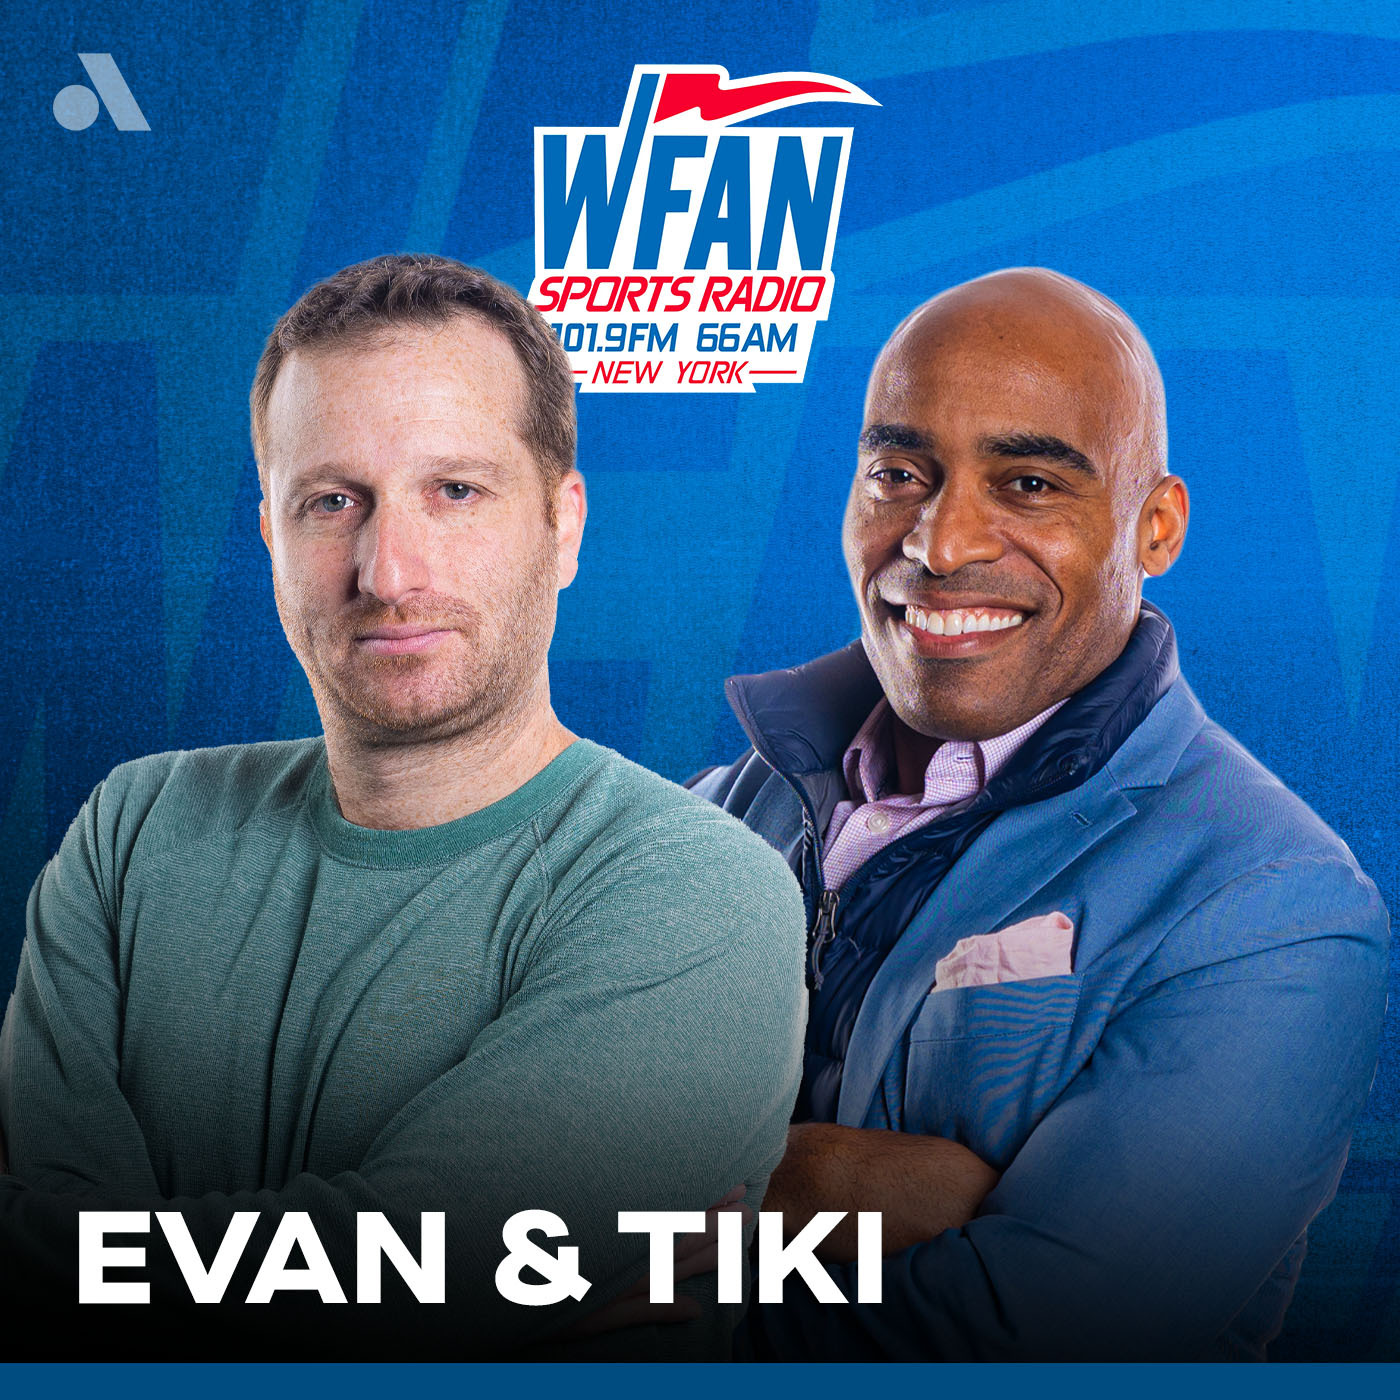 Live from CitiField, Evan & Tiki preview Game 1 of the Subway Series